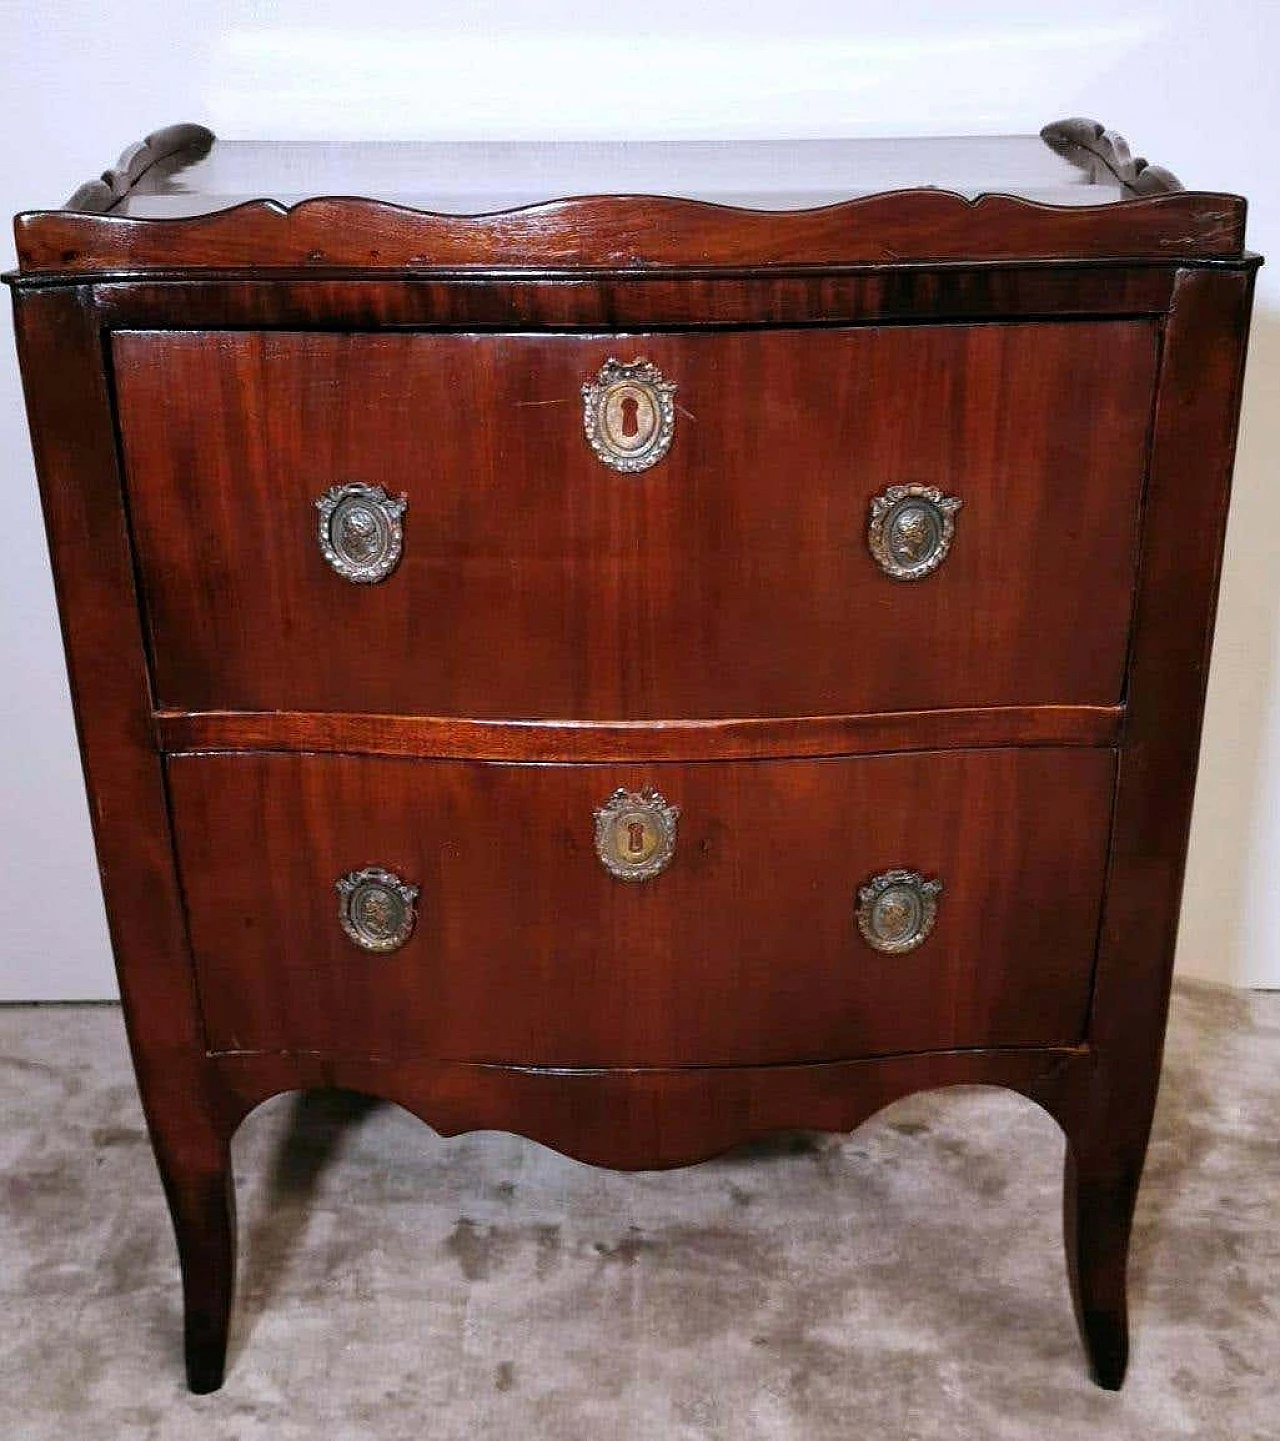 Neoclassical style chest of drawers in mahogany with bronze decorations, 18th century 1332967